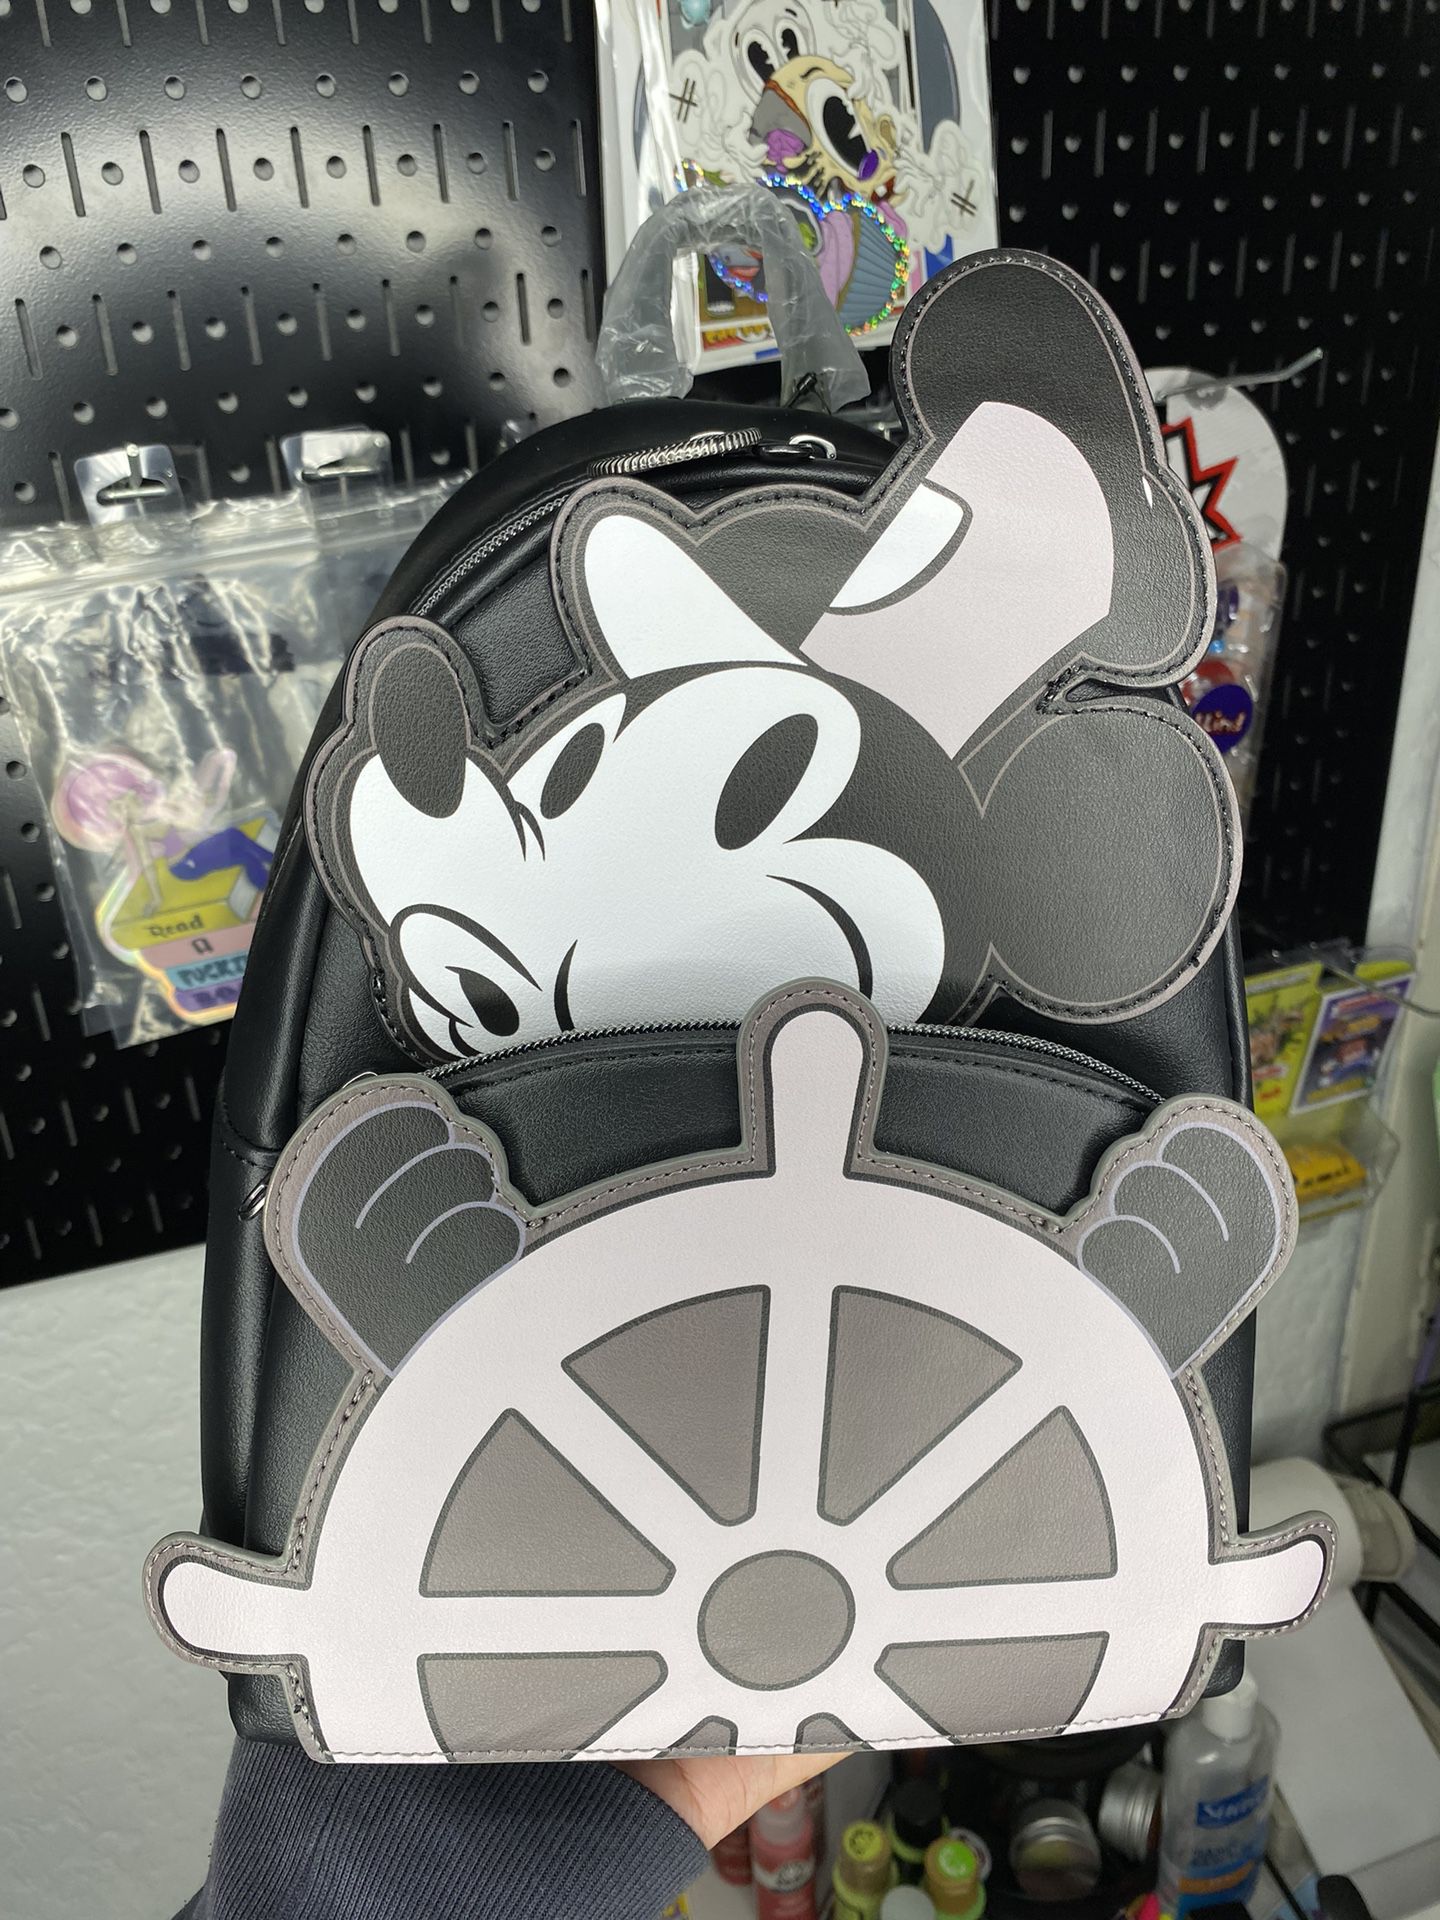 New Steamboat Willie Loungefly Backpack Arrives at the Disneyland